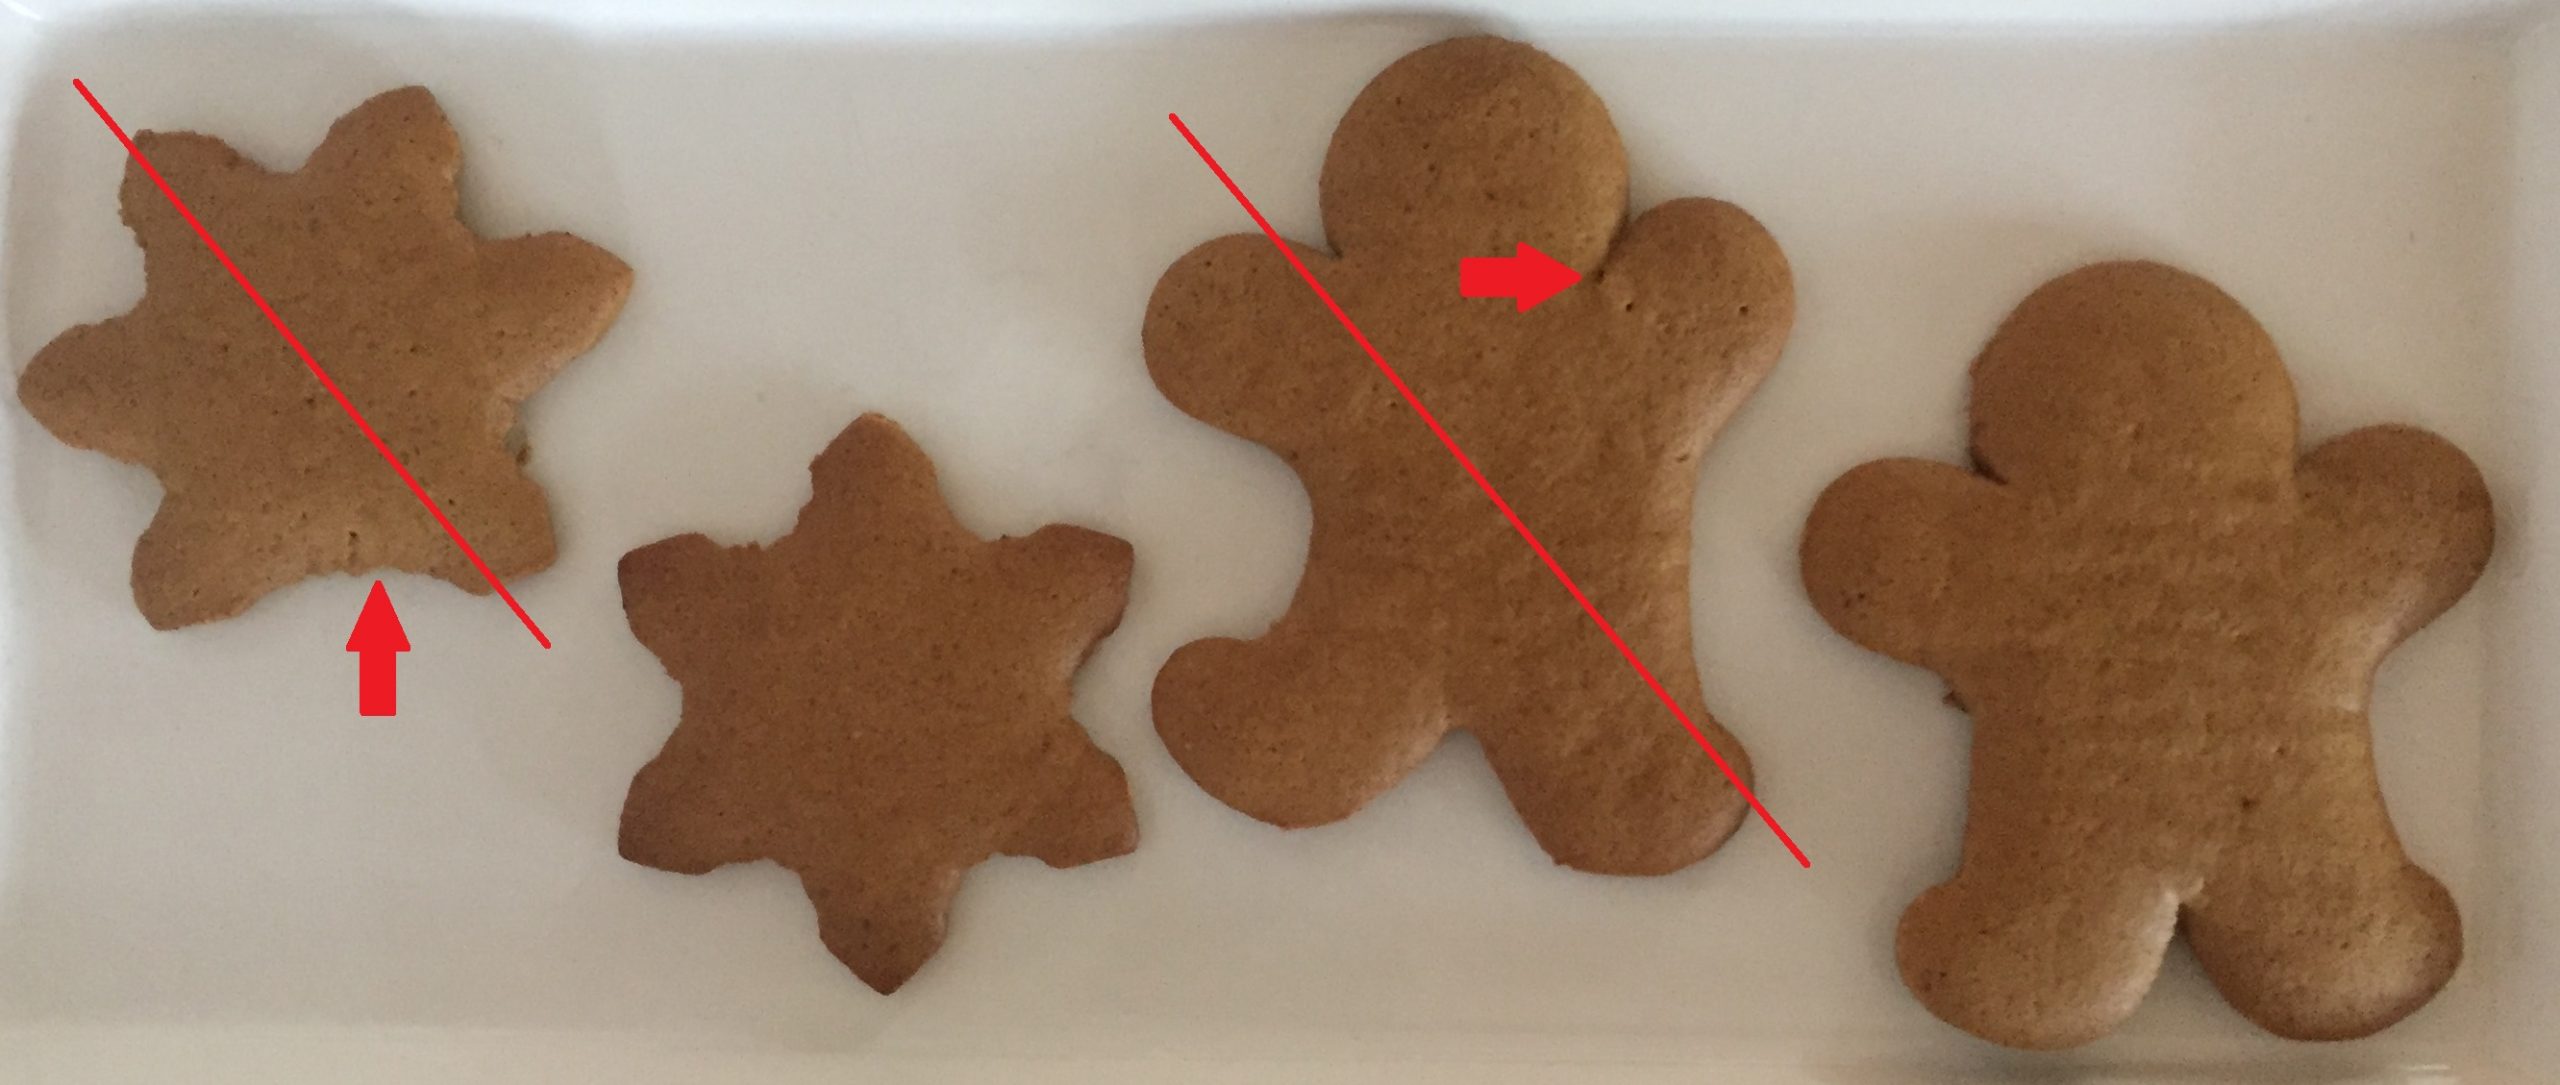 https://sammywongskitchen.com/wp-content/uploads/2020/12/annotated-gingerbread-scaled.jpg